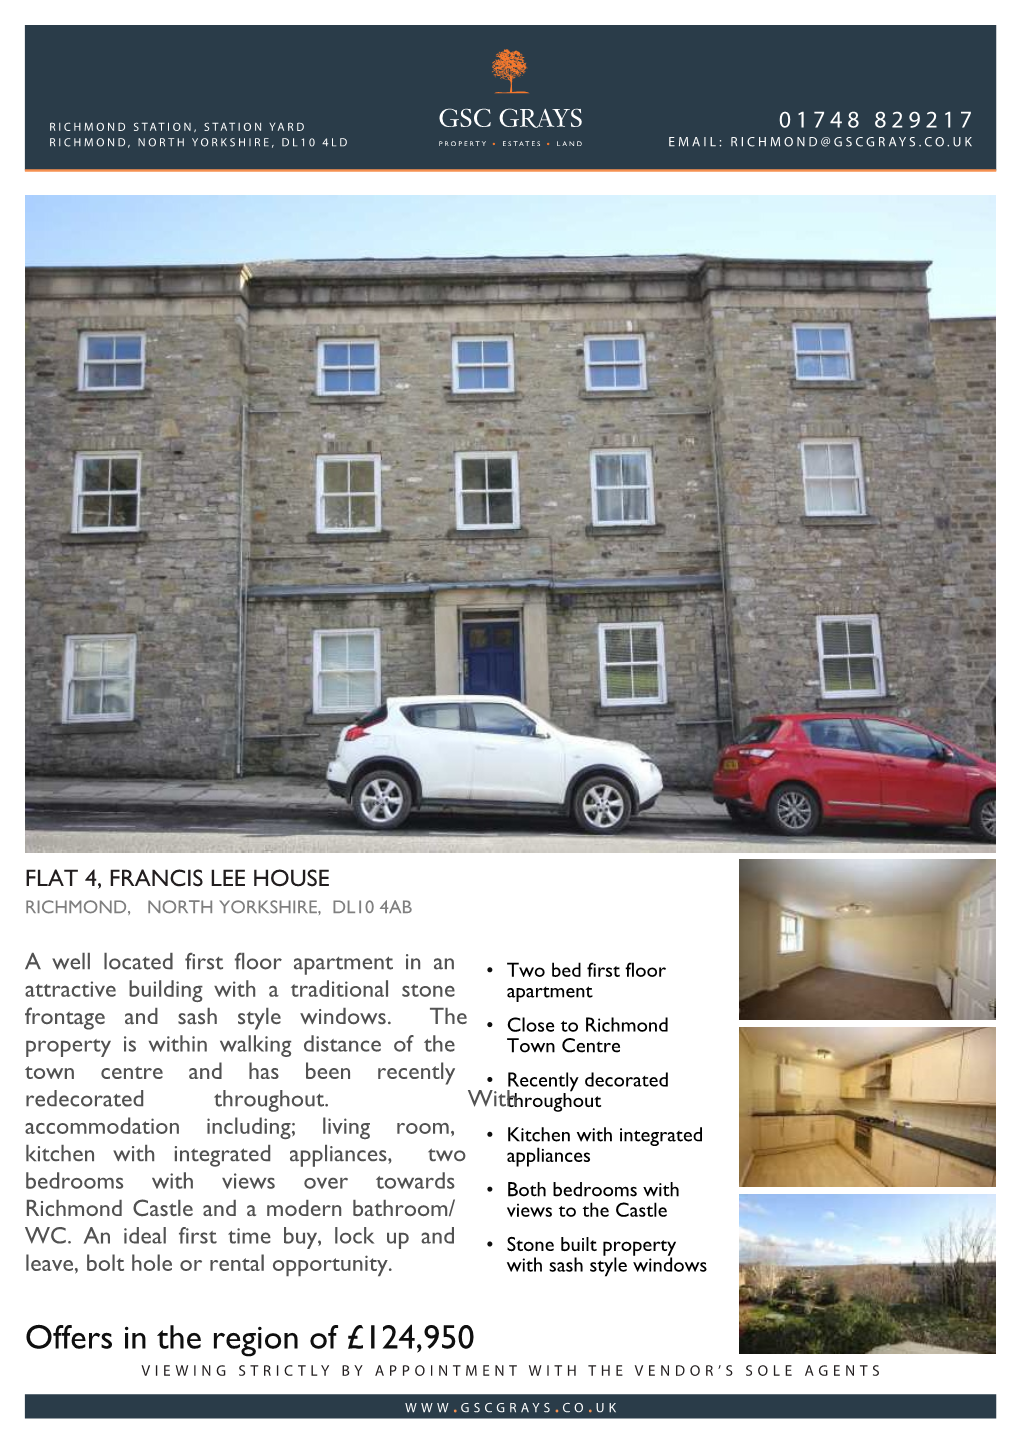 Offers in the Region of £124,950 Viewing Strictly by Appointment with the Vendor’S Sole Agents